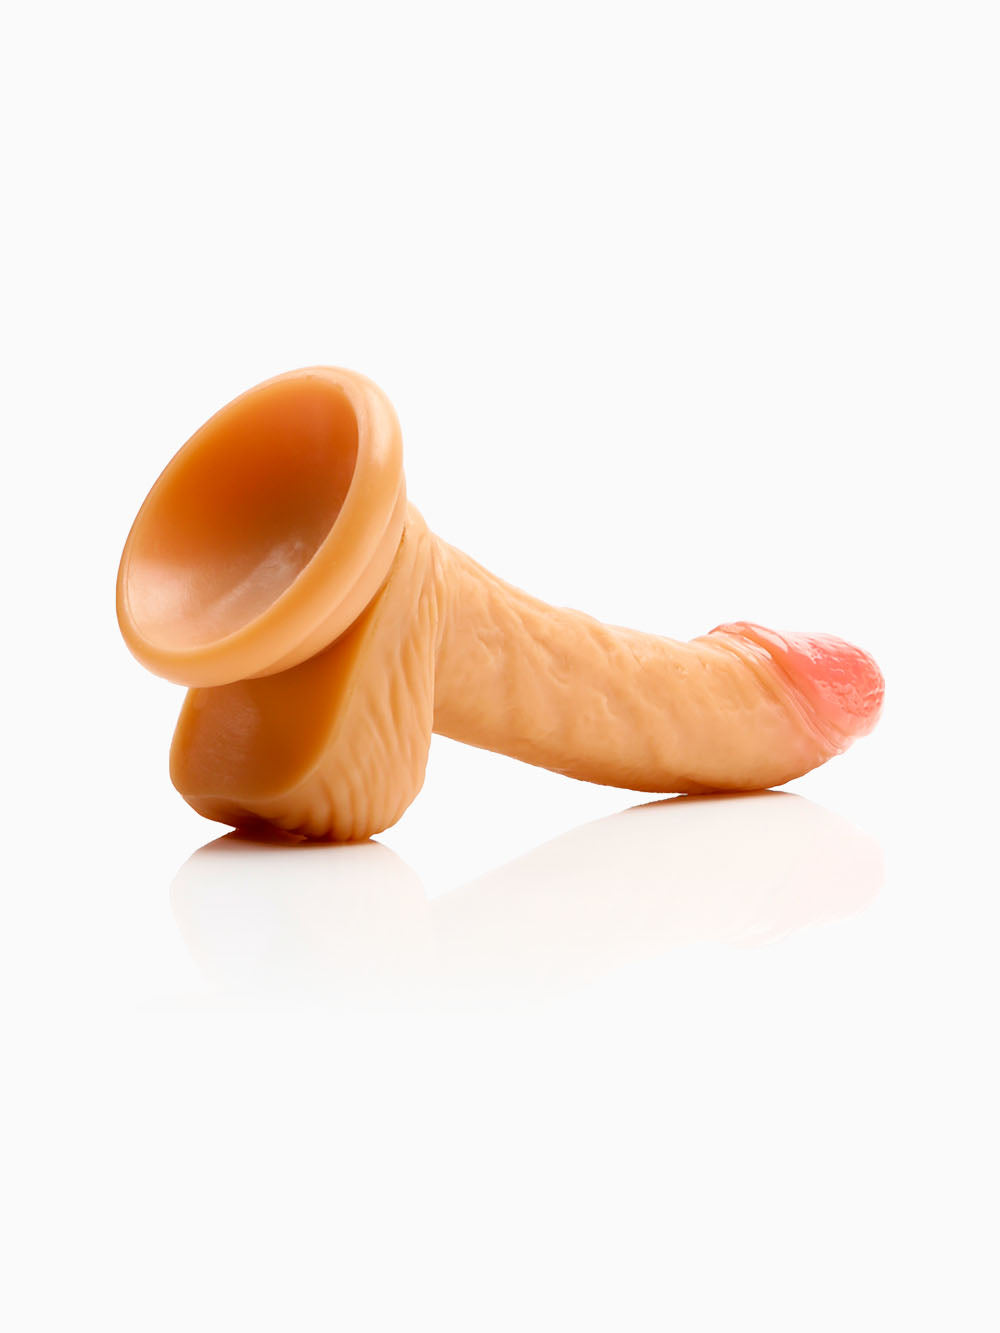 Pillow Talk Endurance Suction Cup Dildo, 6 Inches, Nude